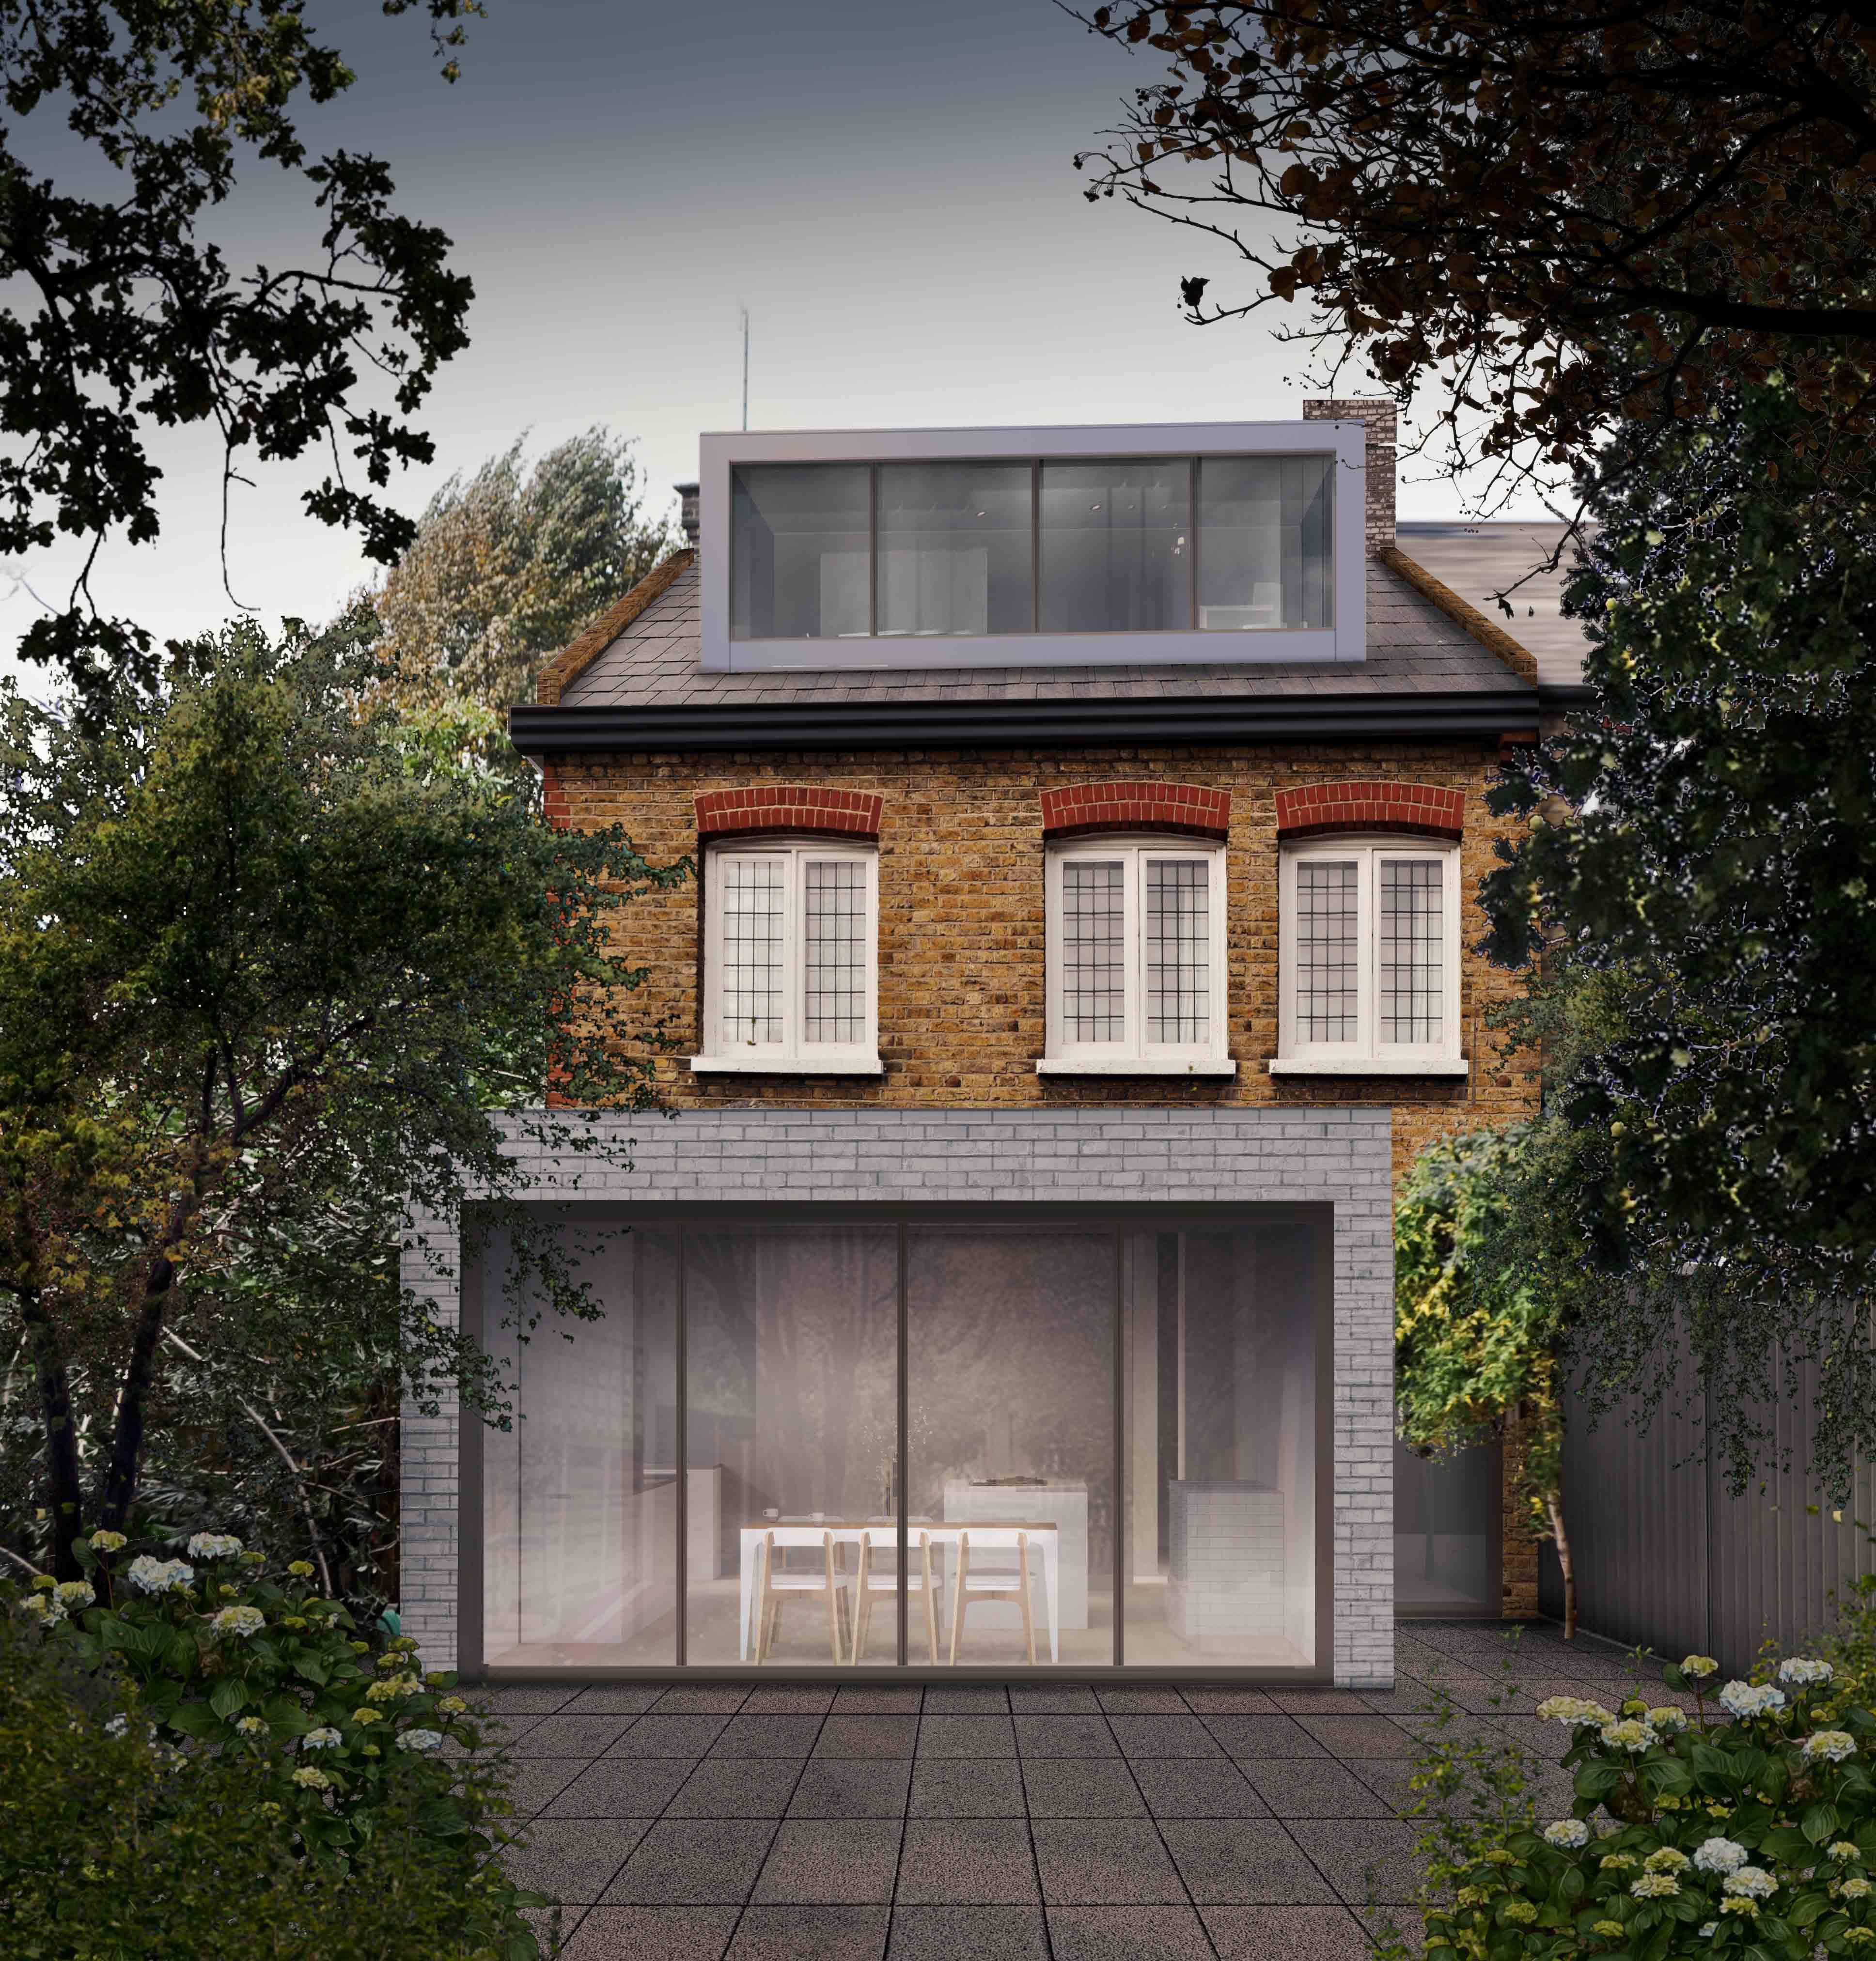 </p> <p>Find your ideal home design pro on designfor-me.com - get matched and see who's interested in your home project. Click image to see more inspiration from our design pros</p> <p>Design by Ayca, architectural designer from Merton, London</p> <p>#architecture #homedesign #modernhomes #homeinspiration #extensions #extensiondesign #extensioninspiration #extensionideas #houseextension #slidingdoors #loftextensions #loftextensiondesign </p> <p>